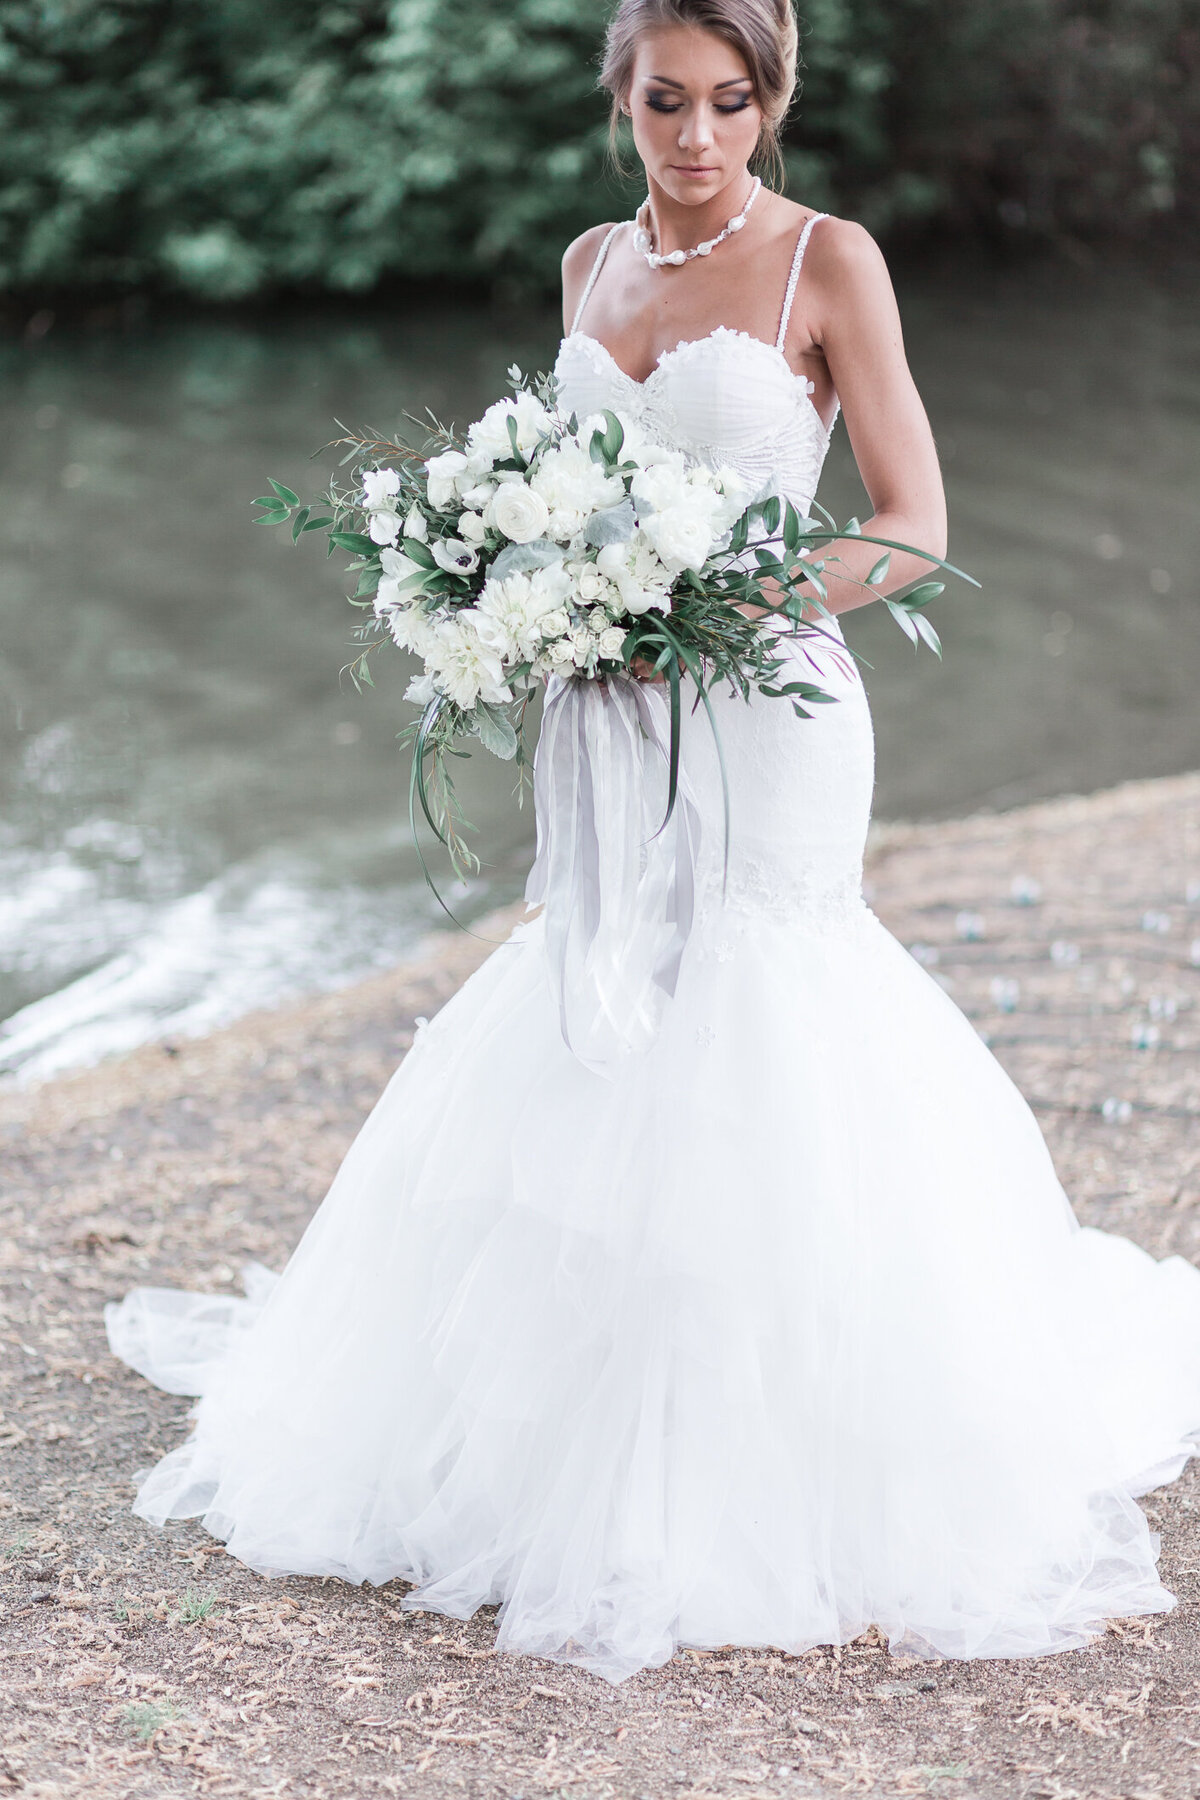 Kaloya Park Okanagan Bride by the water in couture gown with floral bouquet